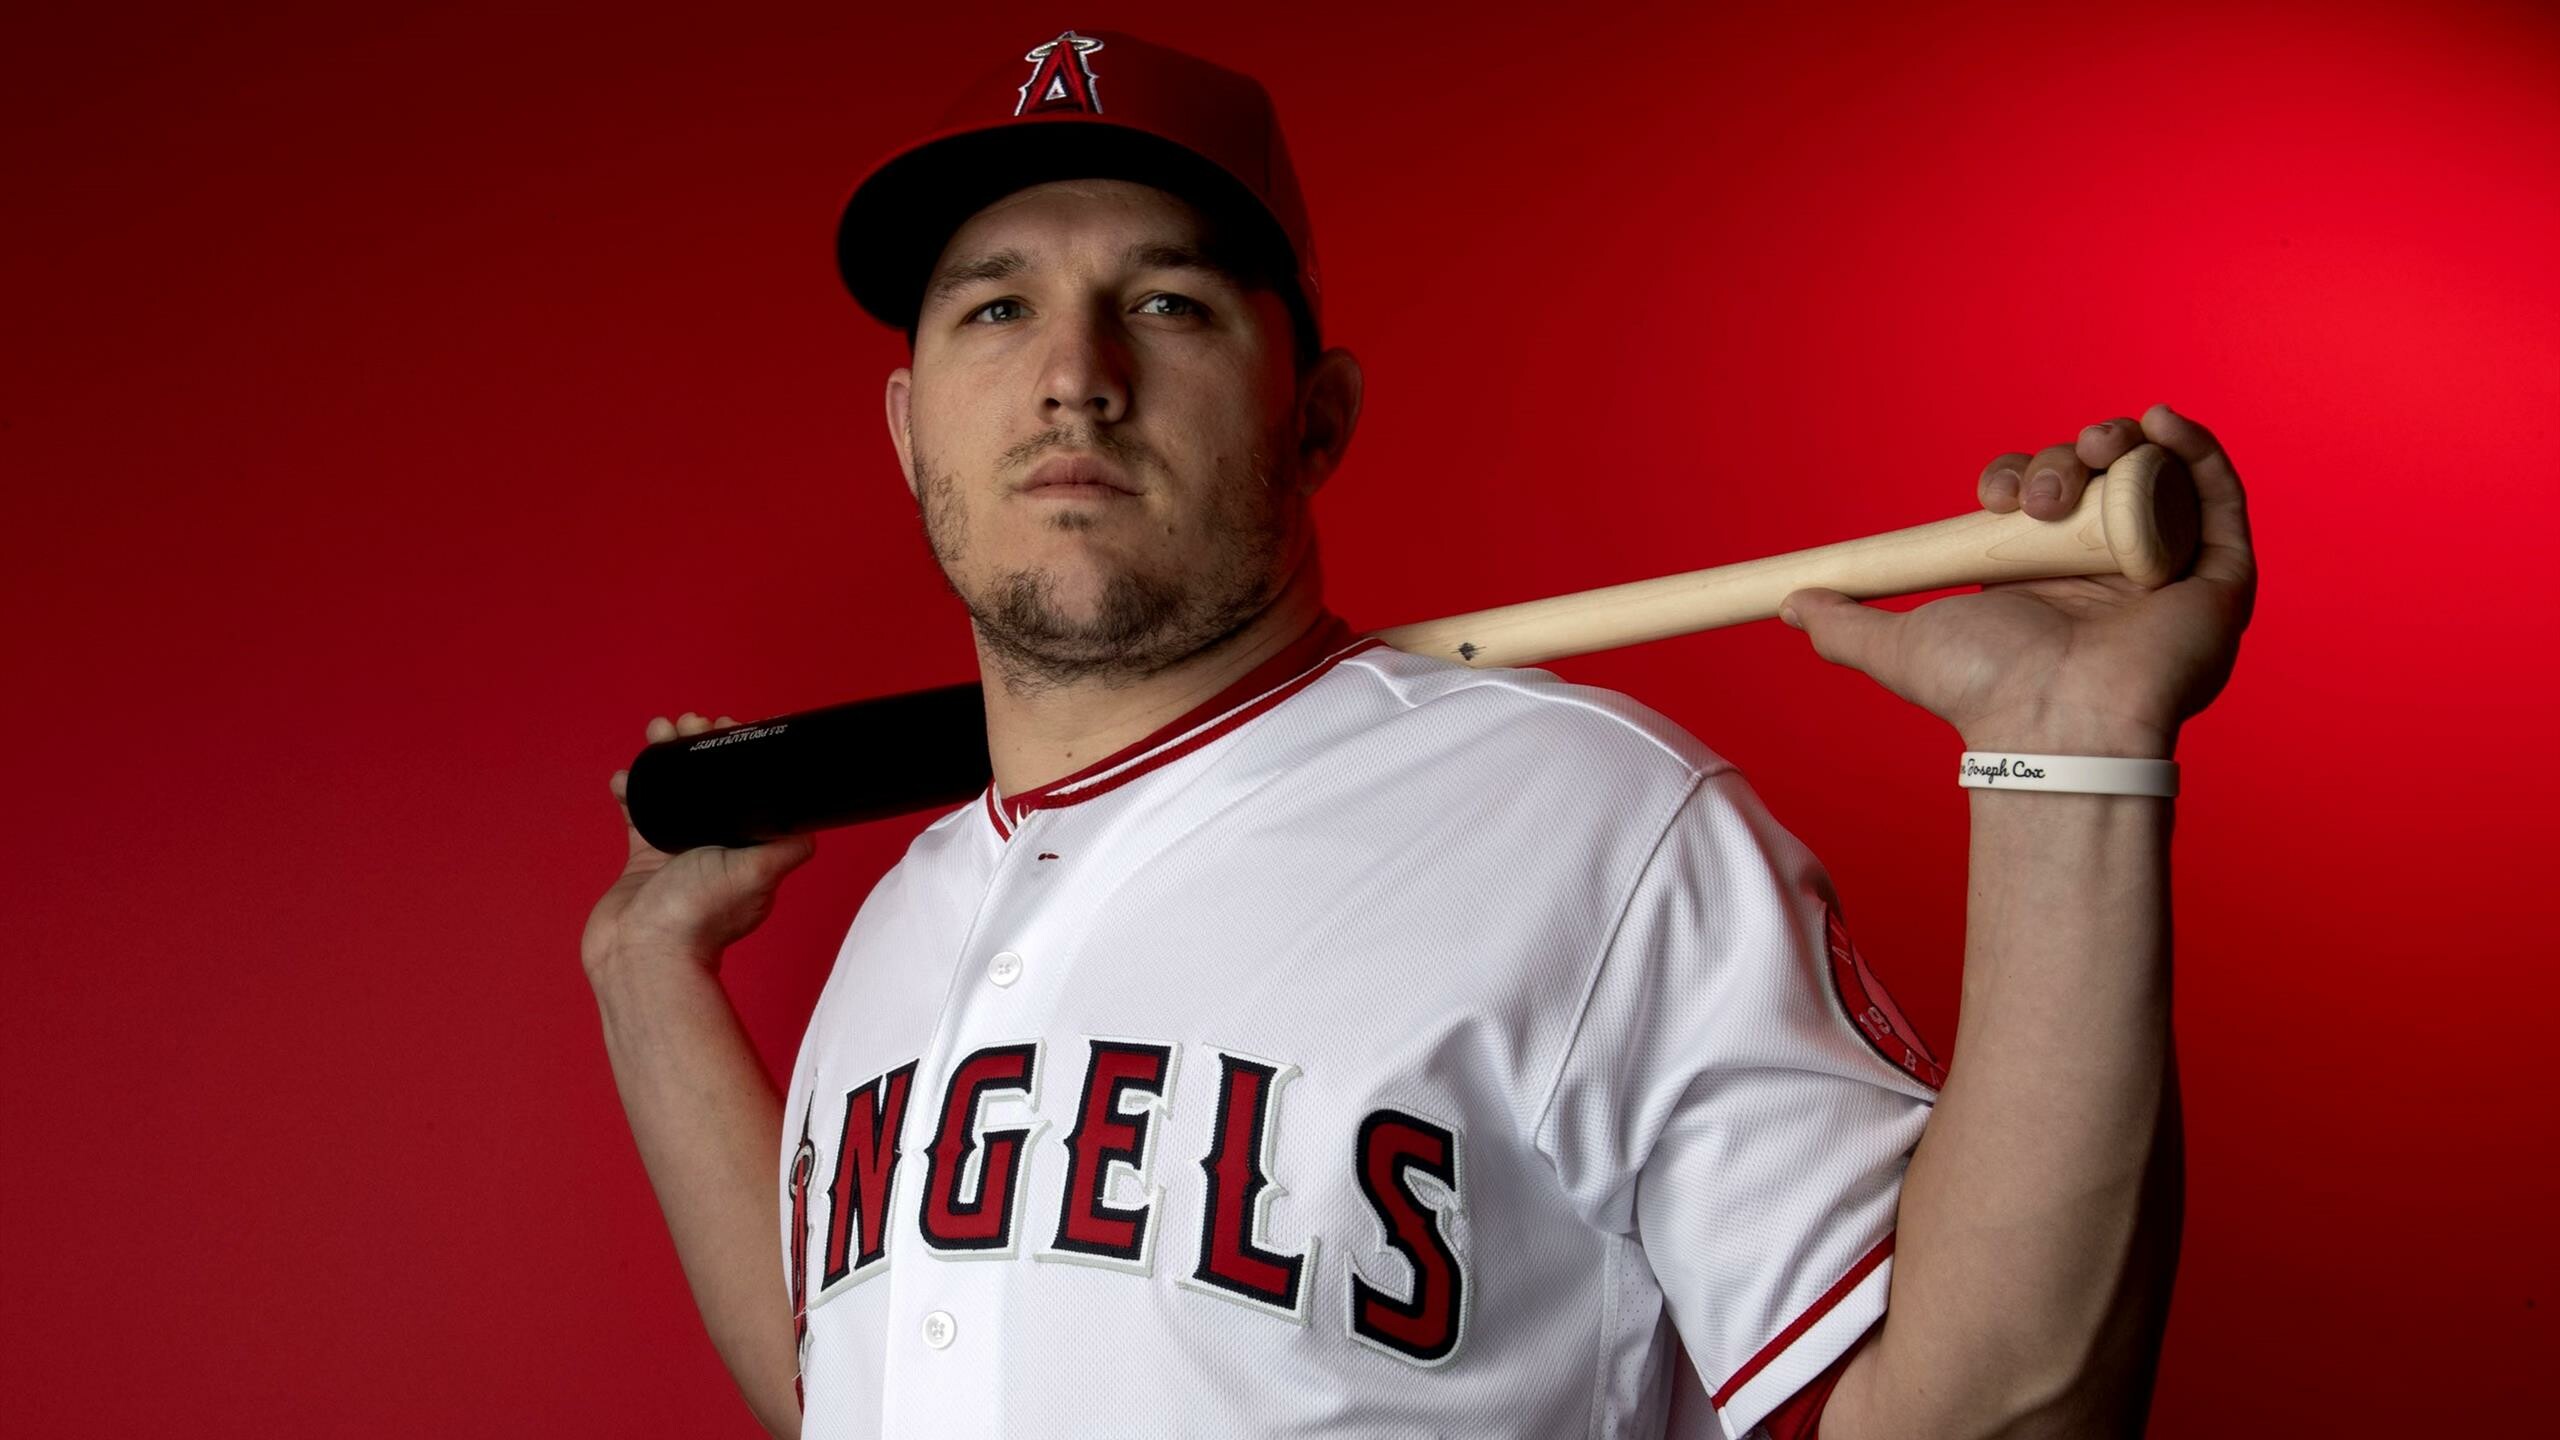 Mike Trout: An American professional baseball player, Center fielder, Los Angeles Angels. 2560x1440 HD Background.